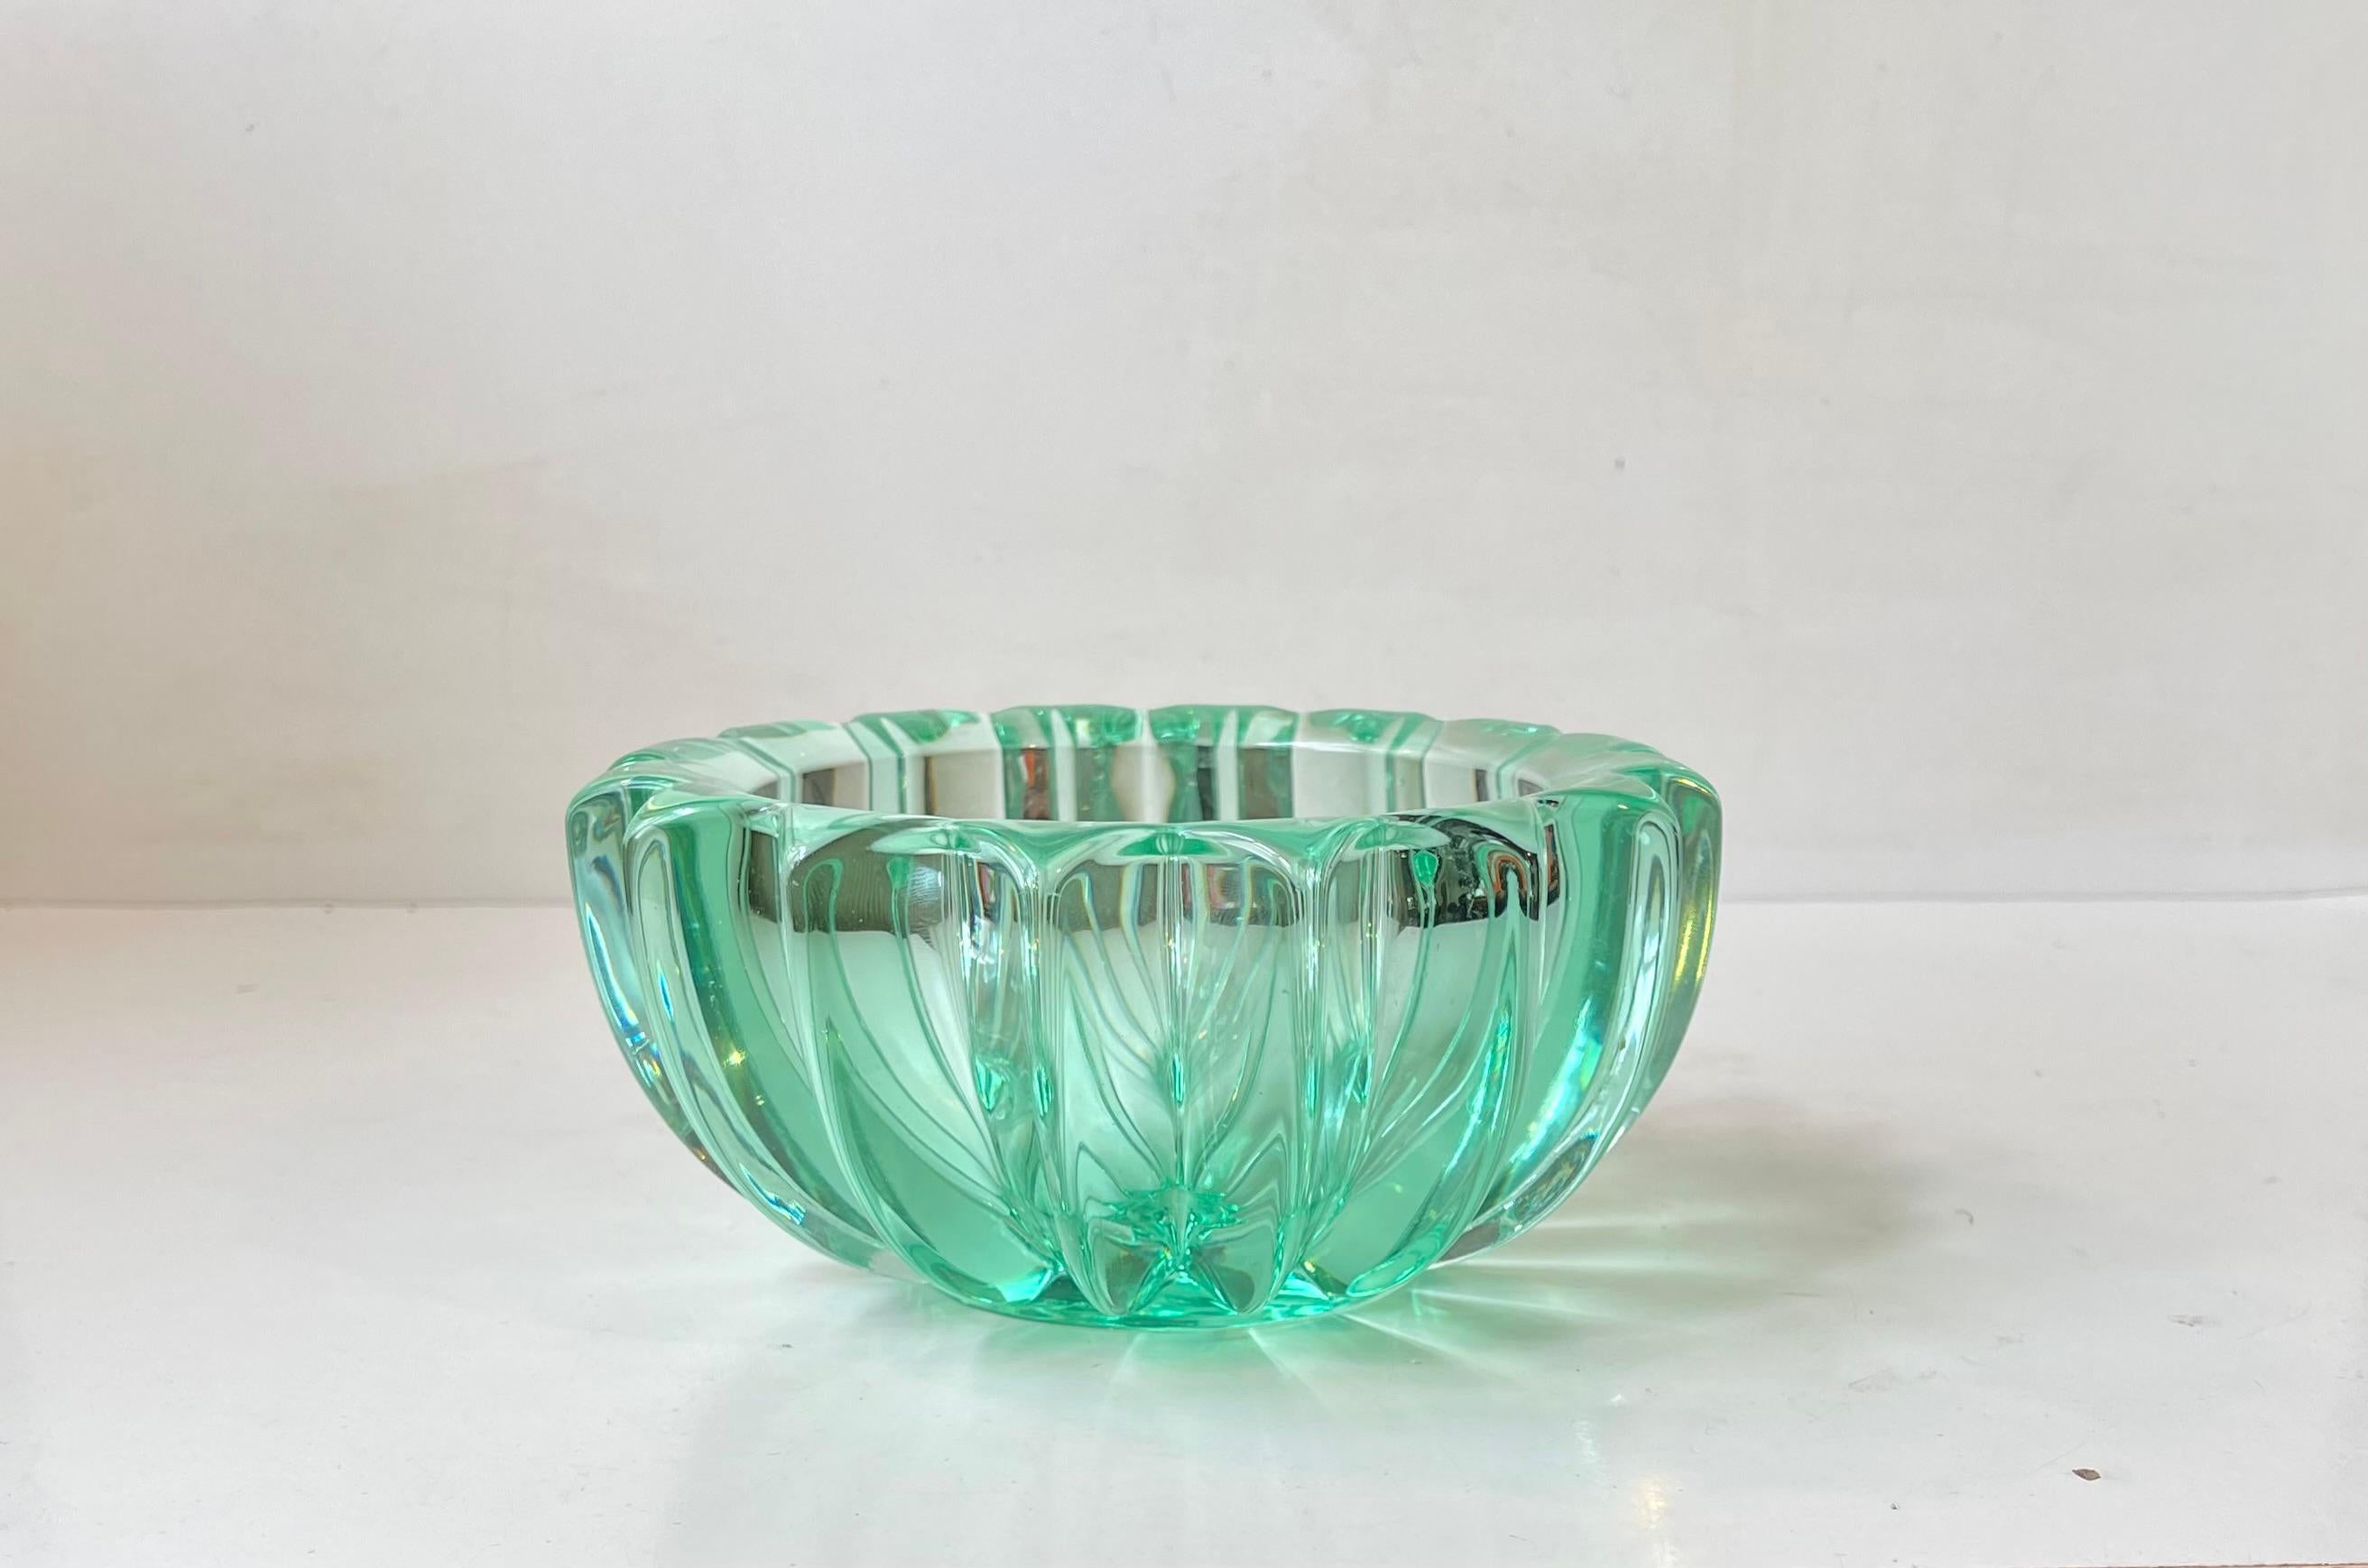 Thick fluted Glass bowl designed by Pierre D’avesn alias Pierre Gire during the late 1930s or early 1940s. It resembles a shooting star. Made by adding chromium oxide and iron oxide during glass fusion process to achieve this distinct and vibrant